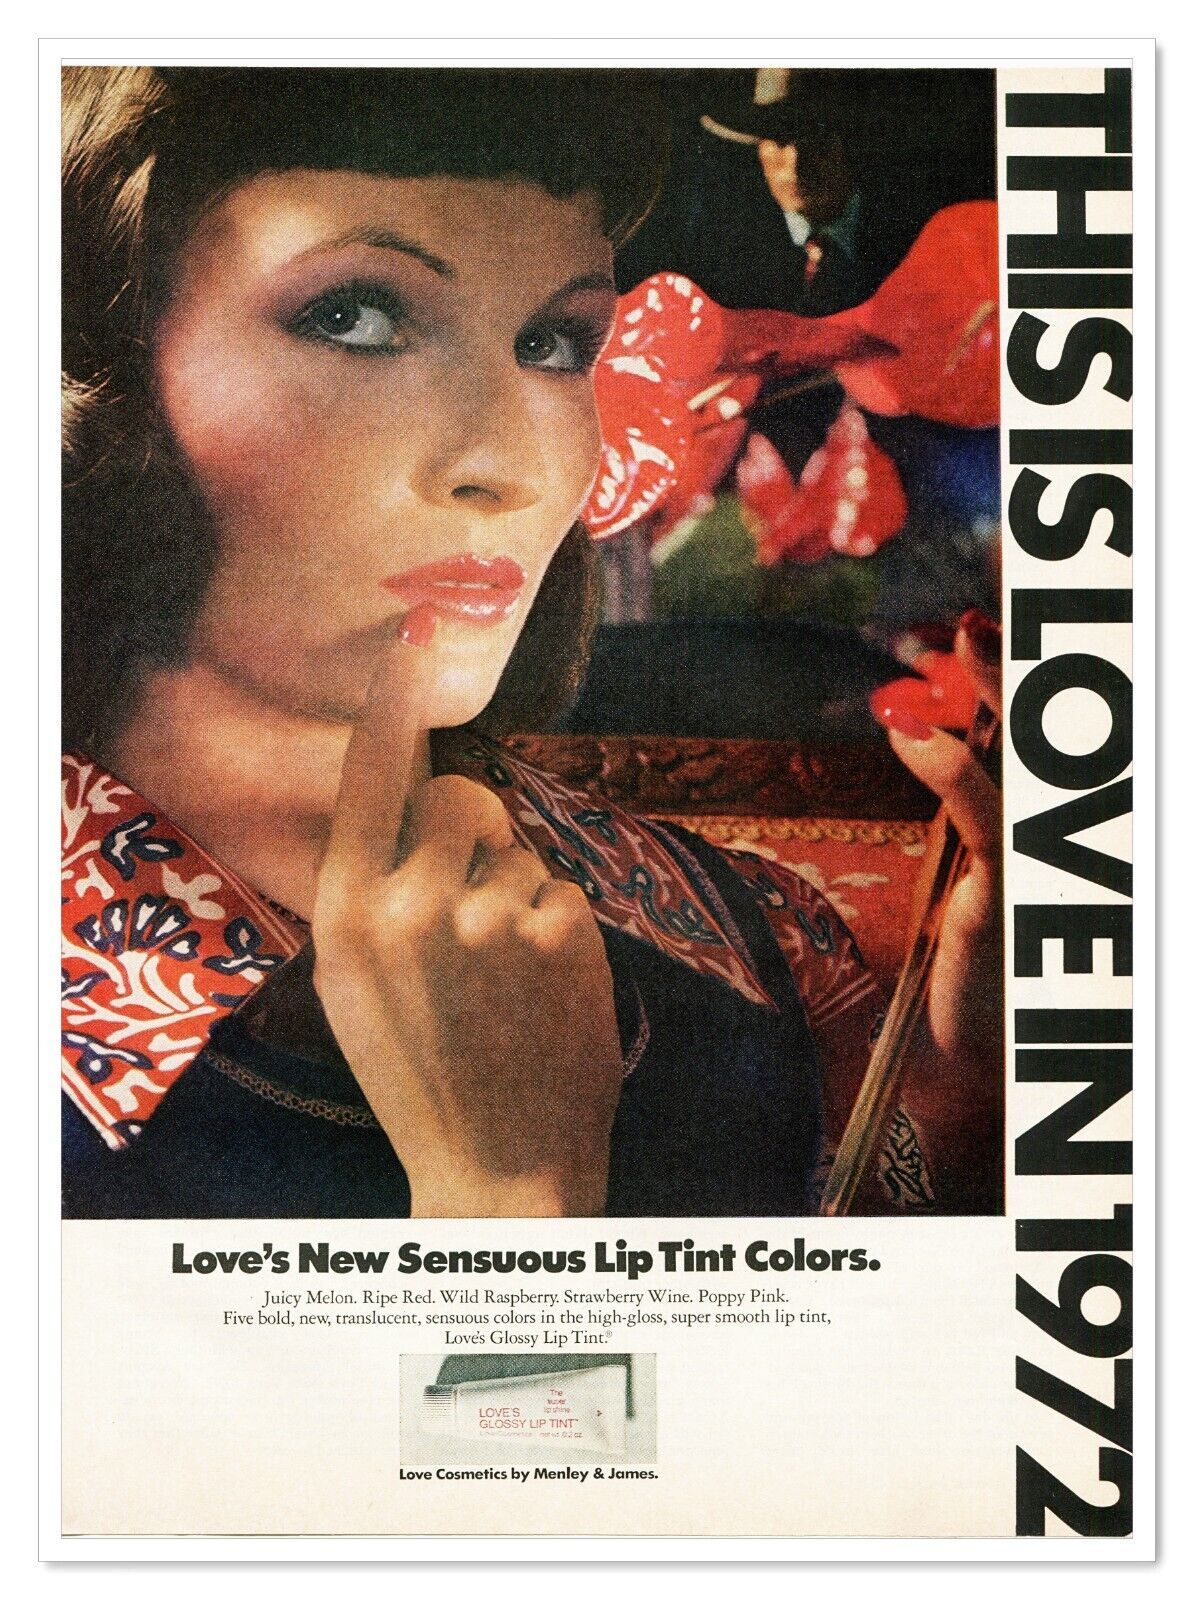 Primary image for Menley & James Love Cosmetics Lip Tint Vintage 1972 Full-Page Magazine Ad